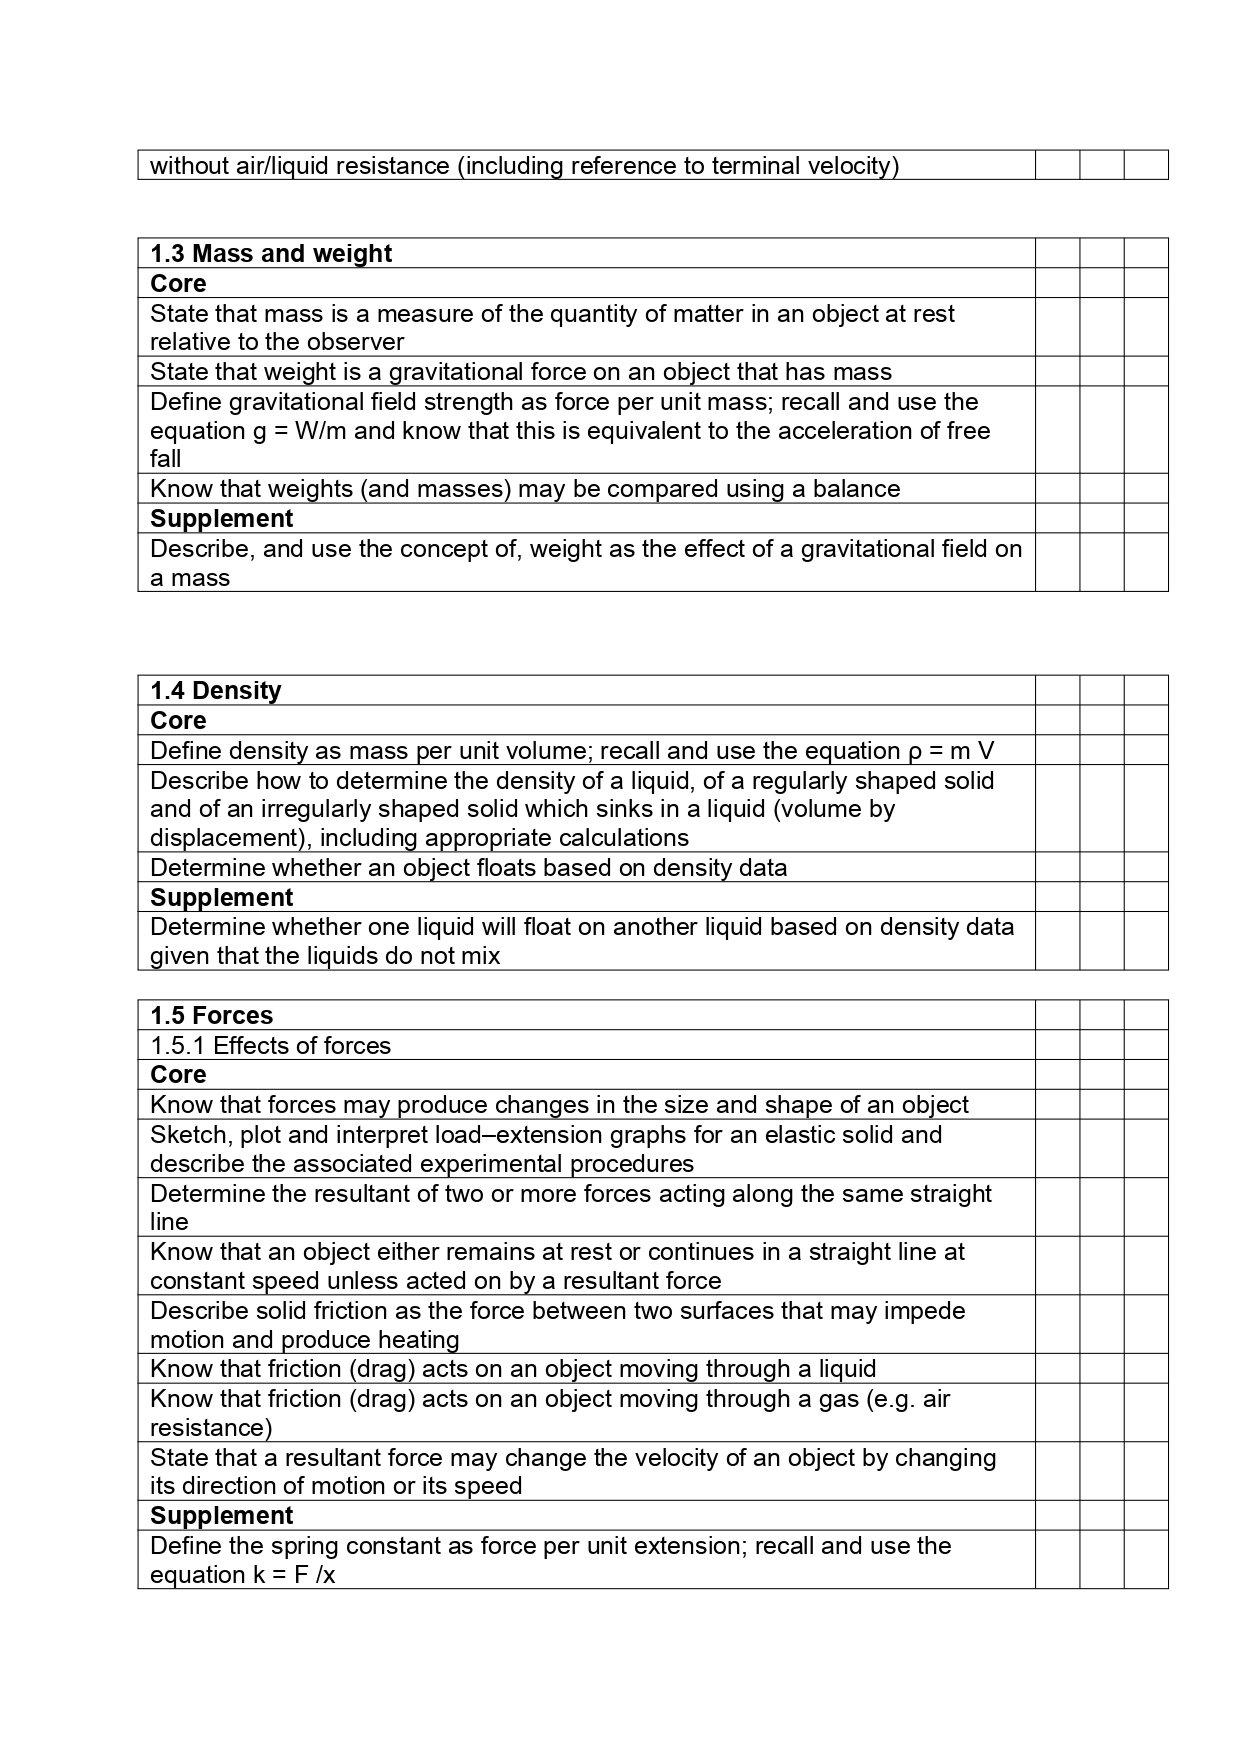 Forces and Motion Checklist_page-0002.jpg